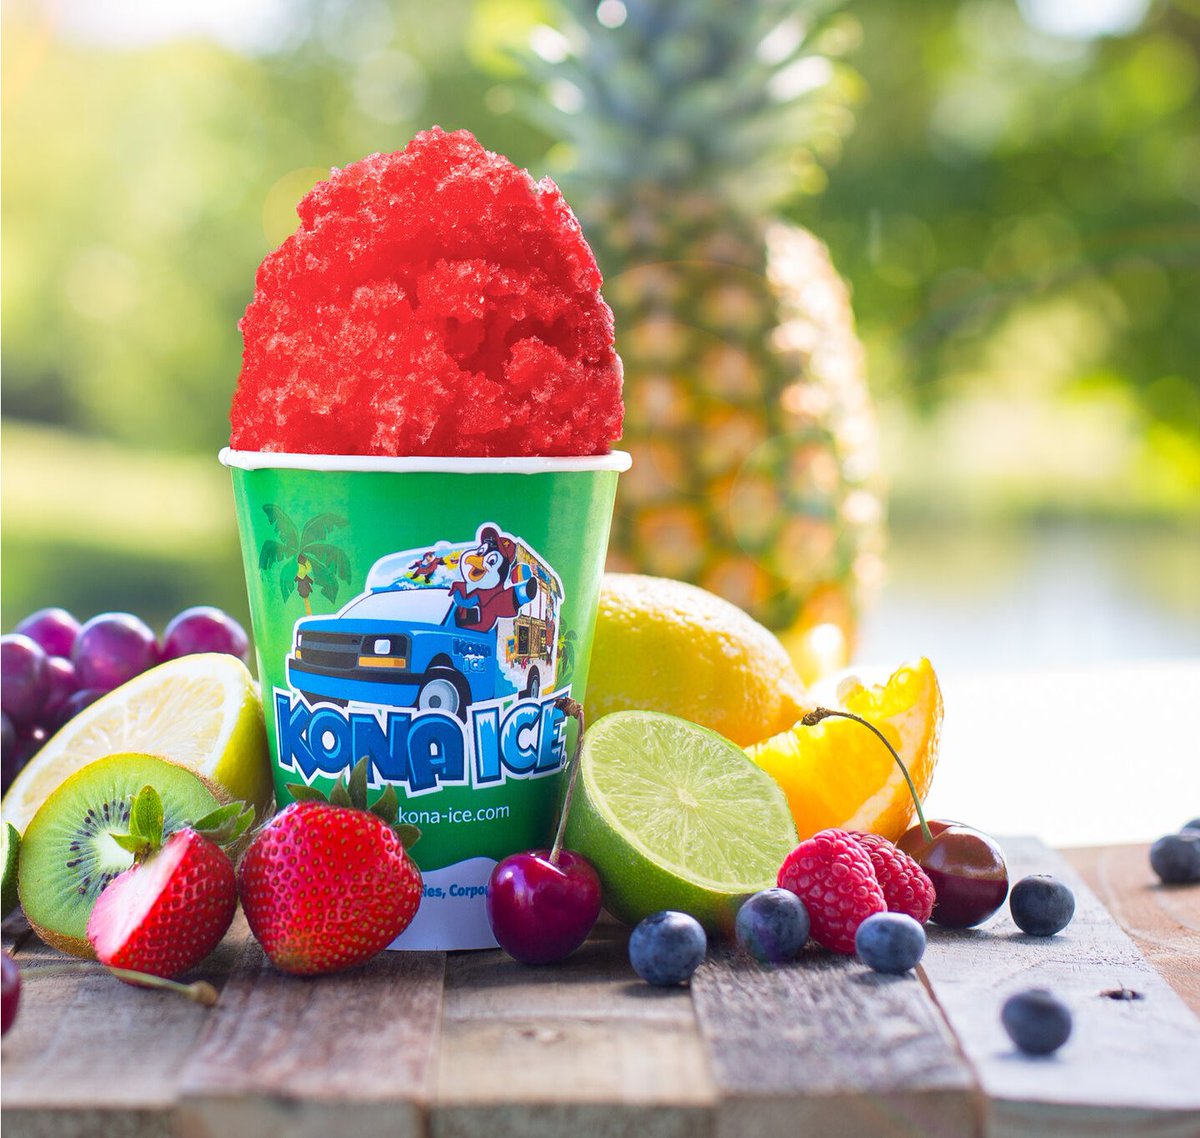 Kona Ice is perfect way to beat the heat and enjoy the flavors of summer! What flavors do you love? 💜 Let us know below! 

#KonaIce #ShavedIceTreats #SummerDelights